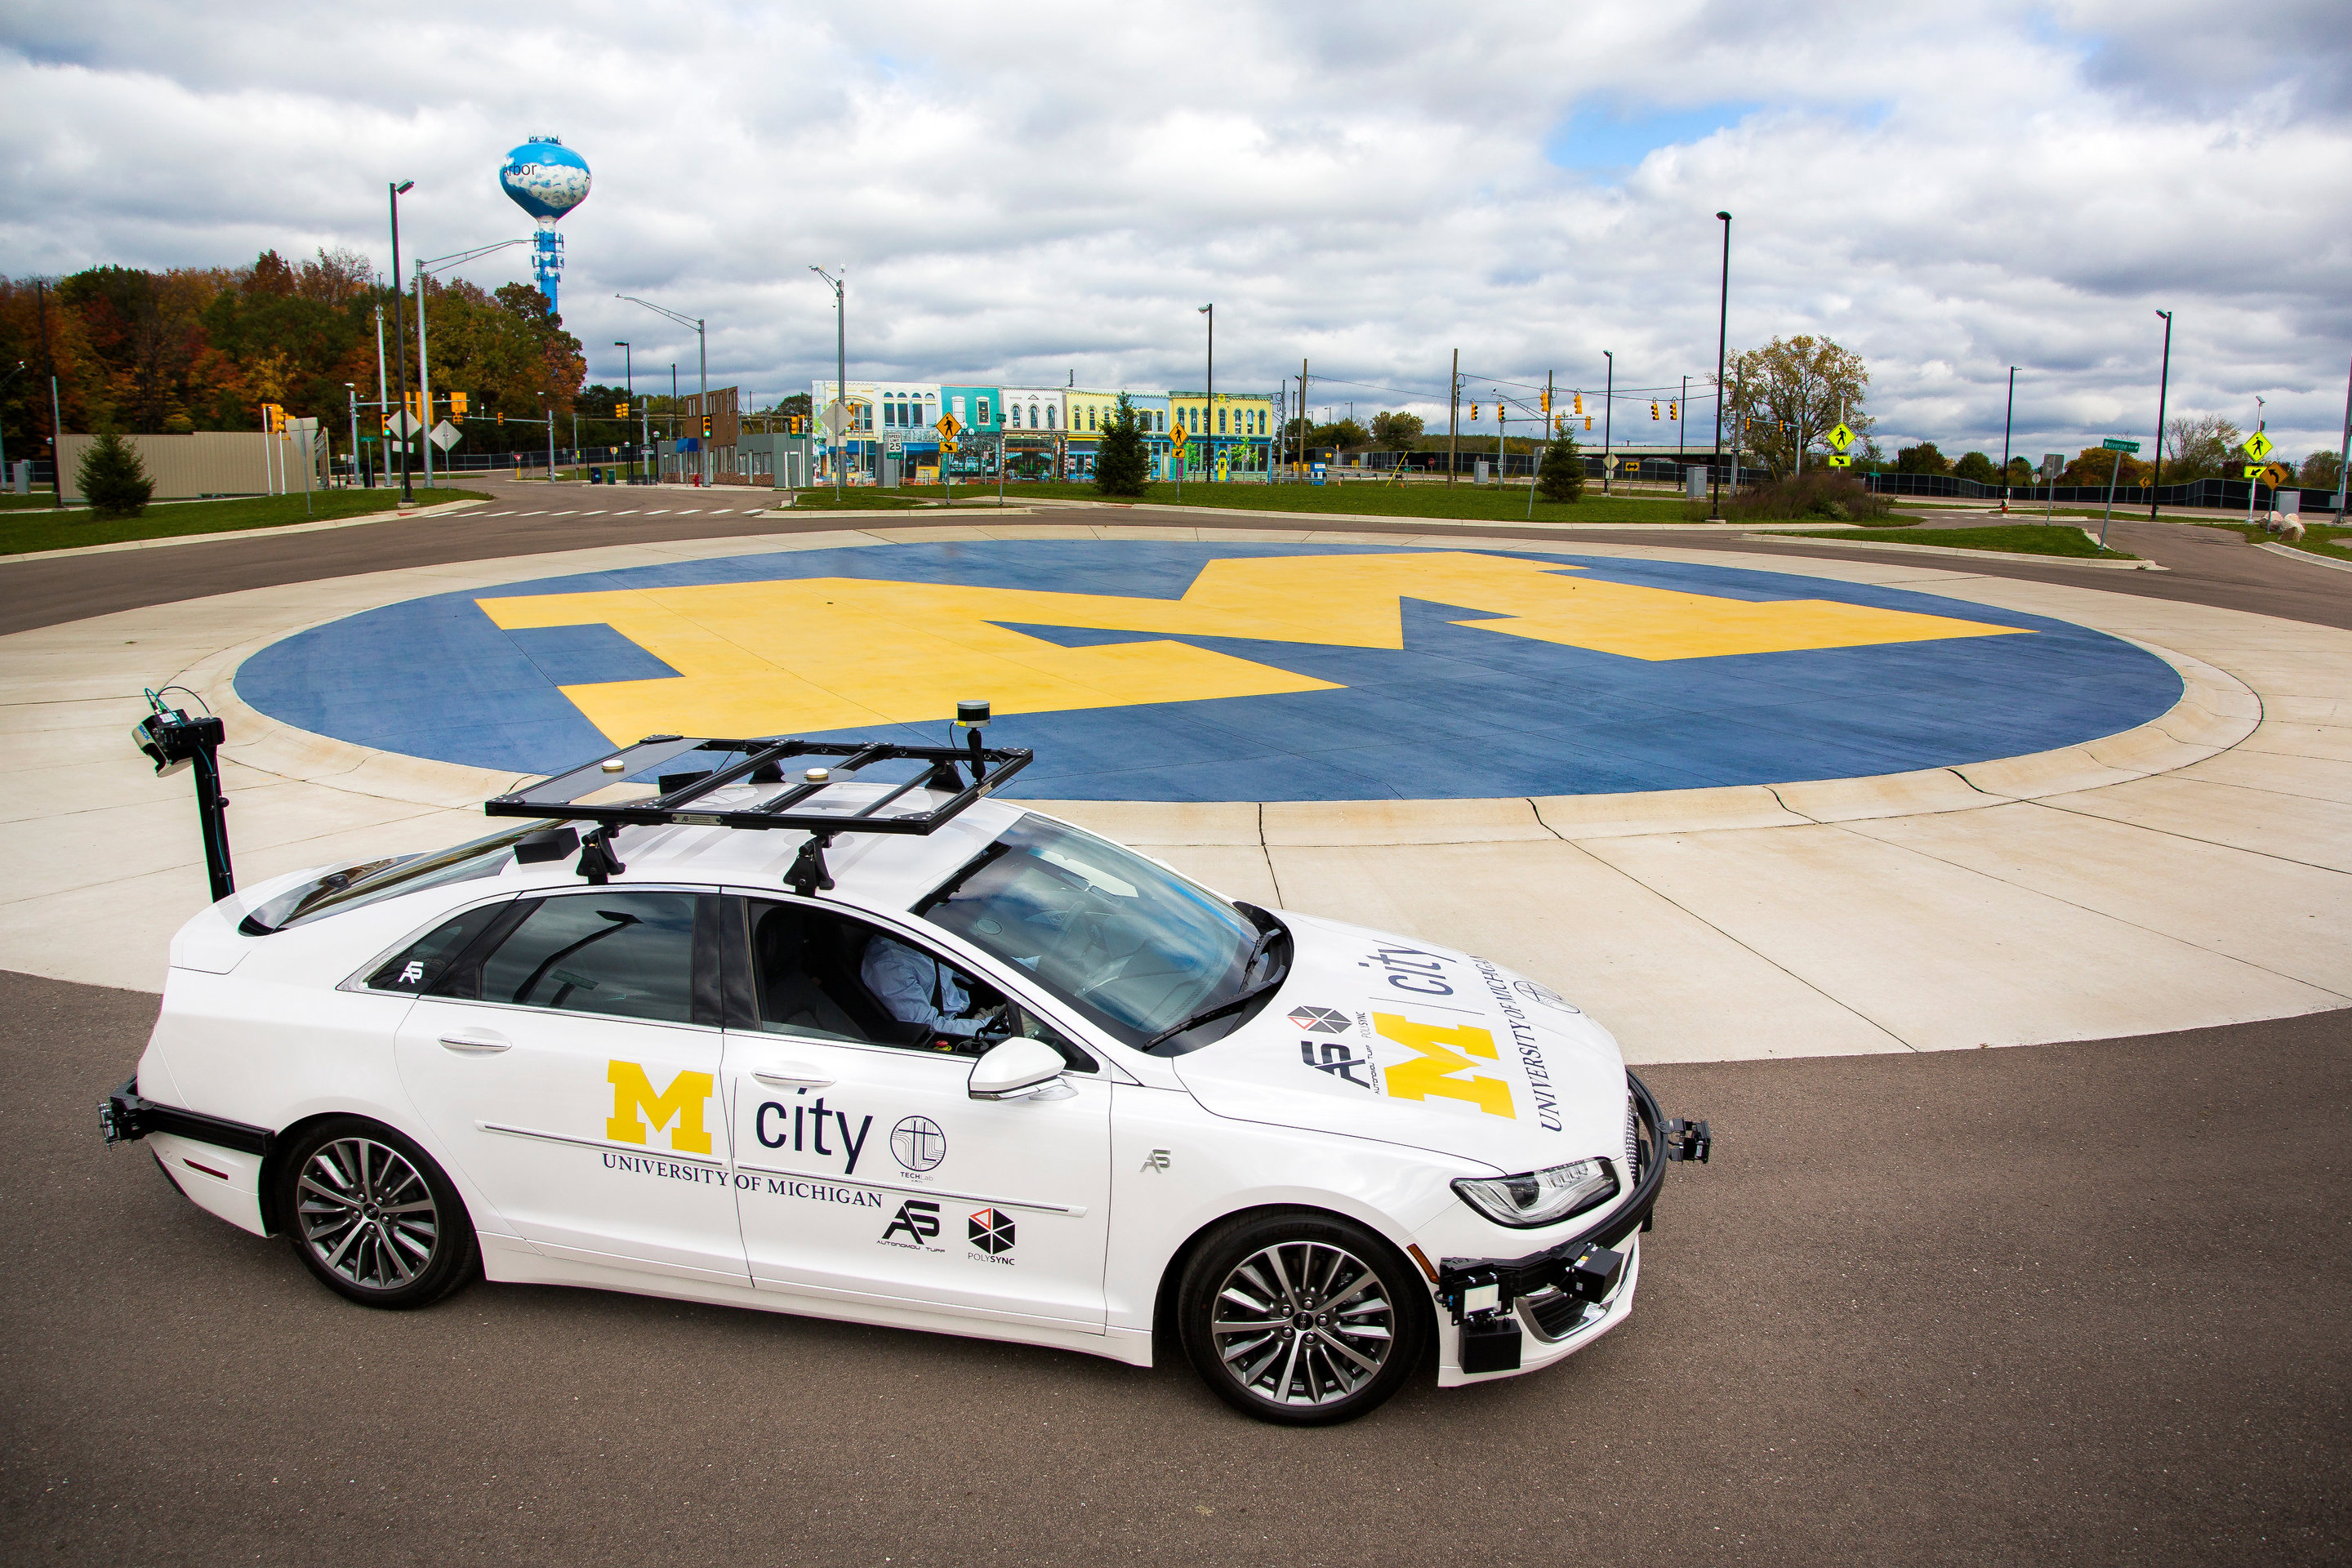  A self-driving car drives around a roundabout, demonstrating the benefits of autonomous vehicles, such as increased safety, efficiency, and mobility.